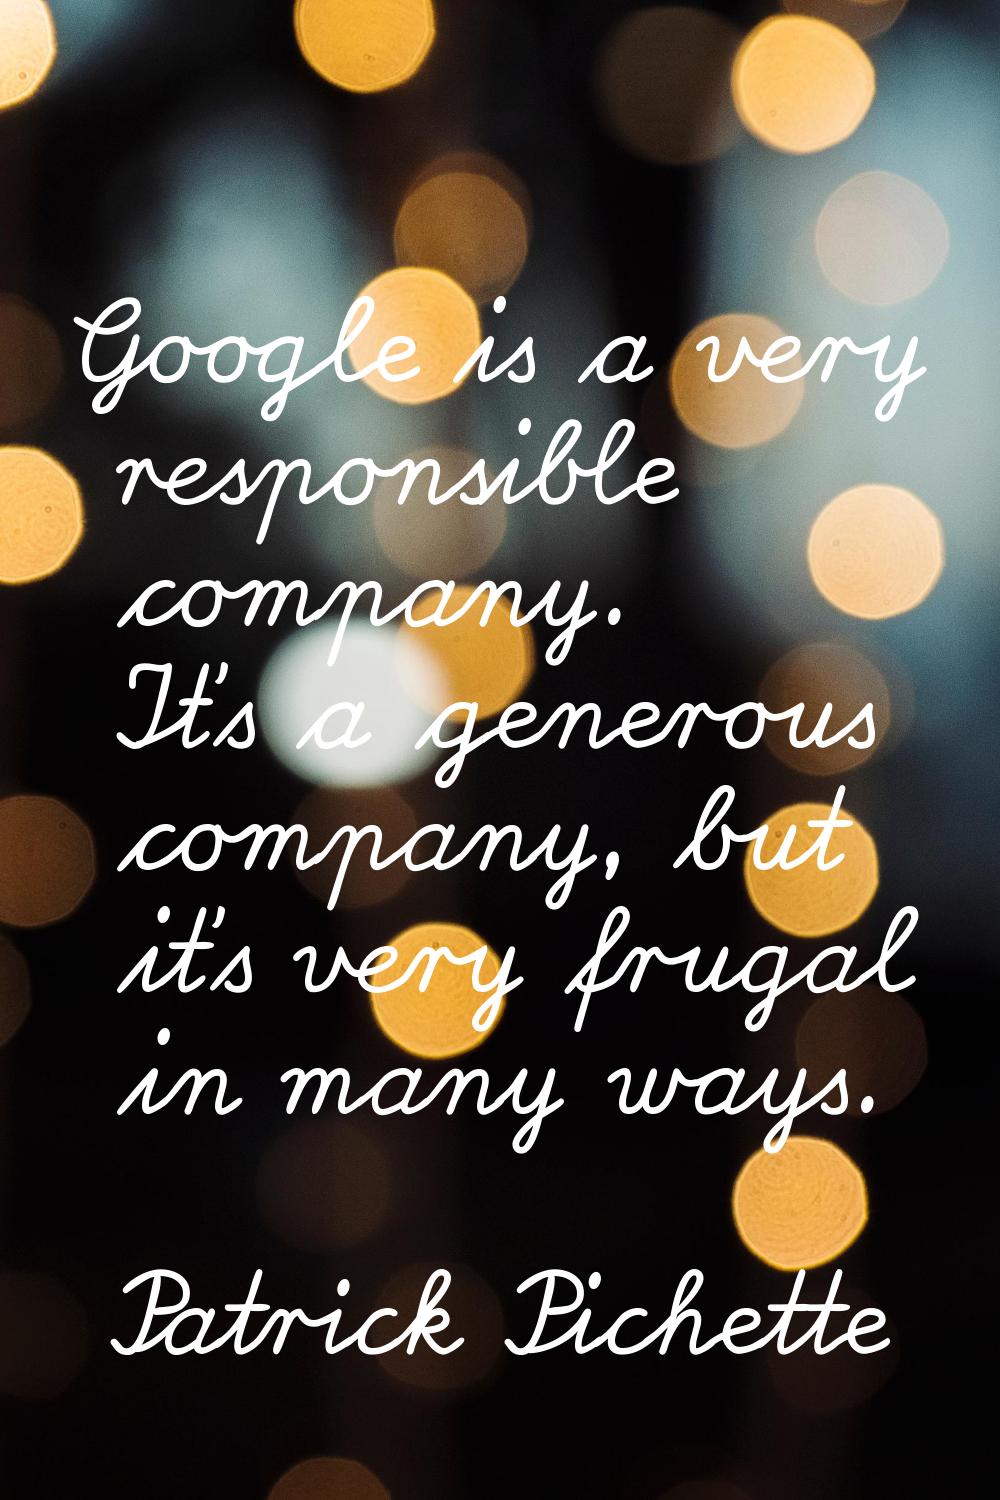 Google is a very responsible company. It's a generous company, but it's very frugal in many ways.